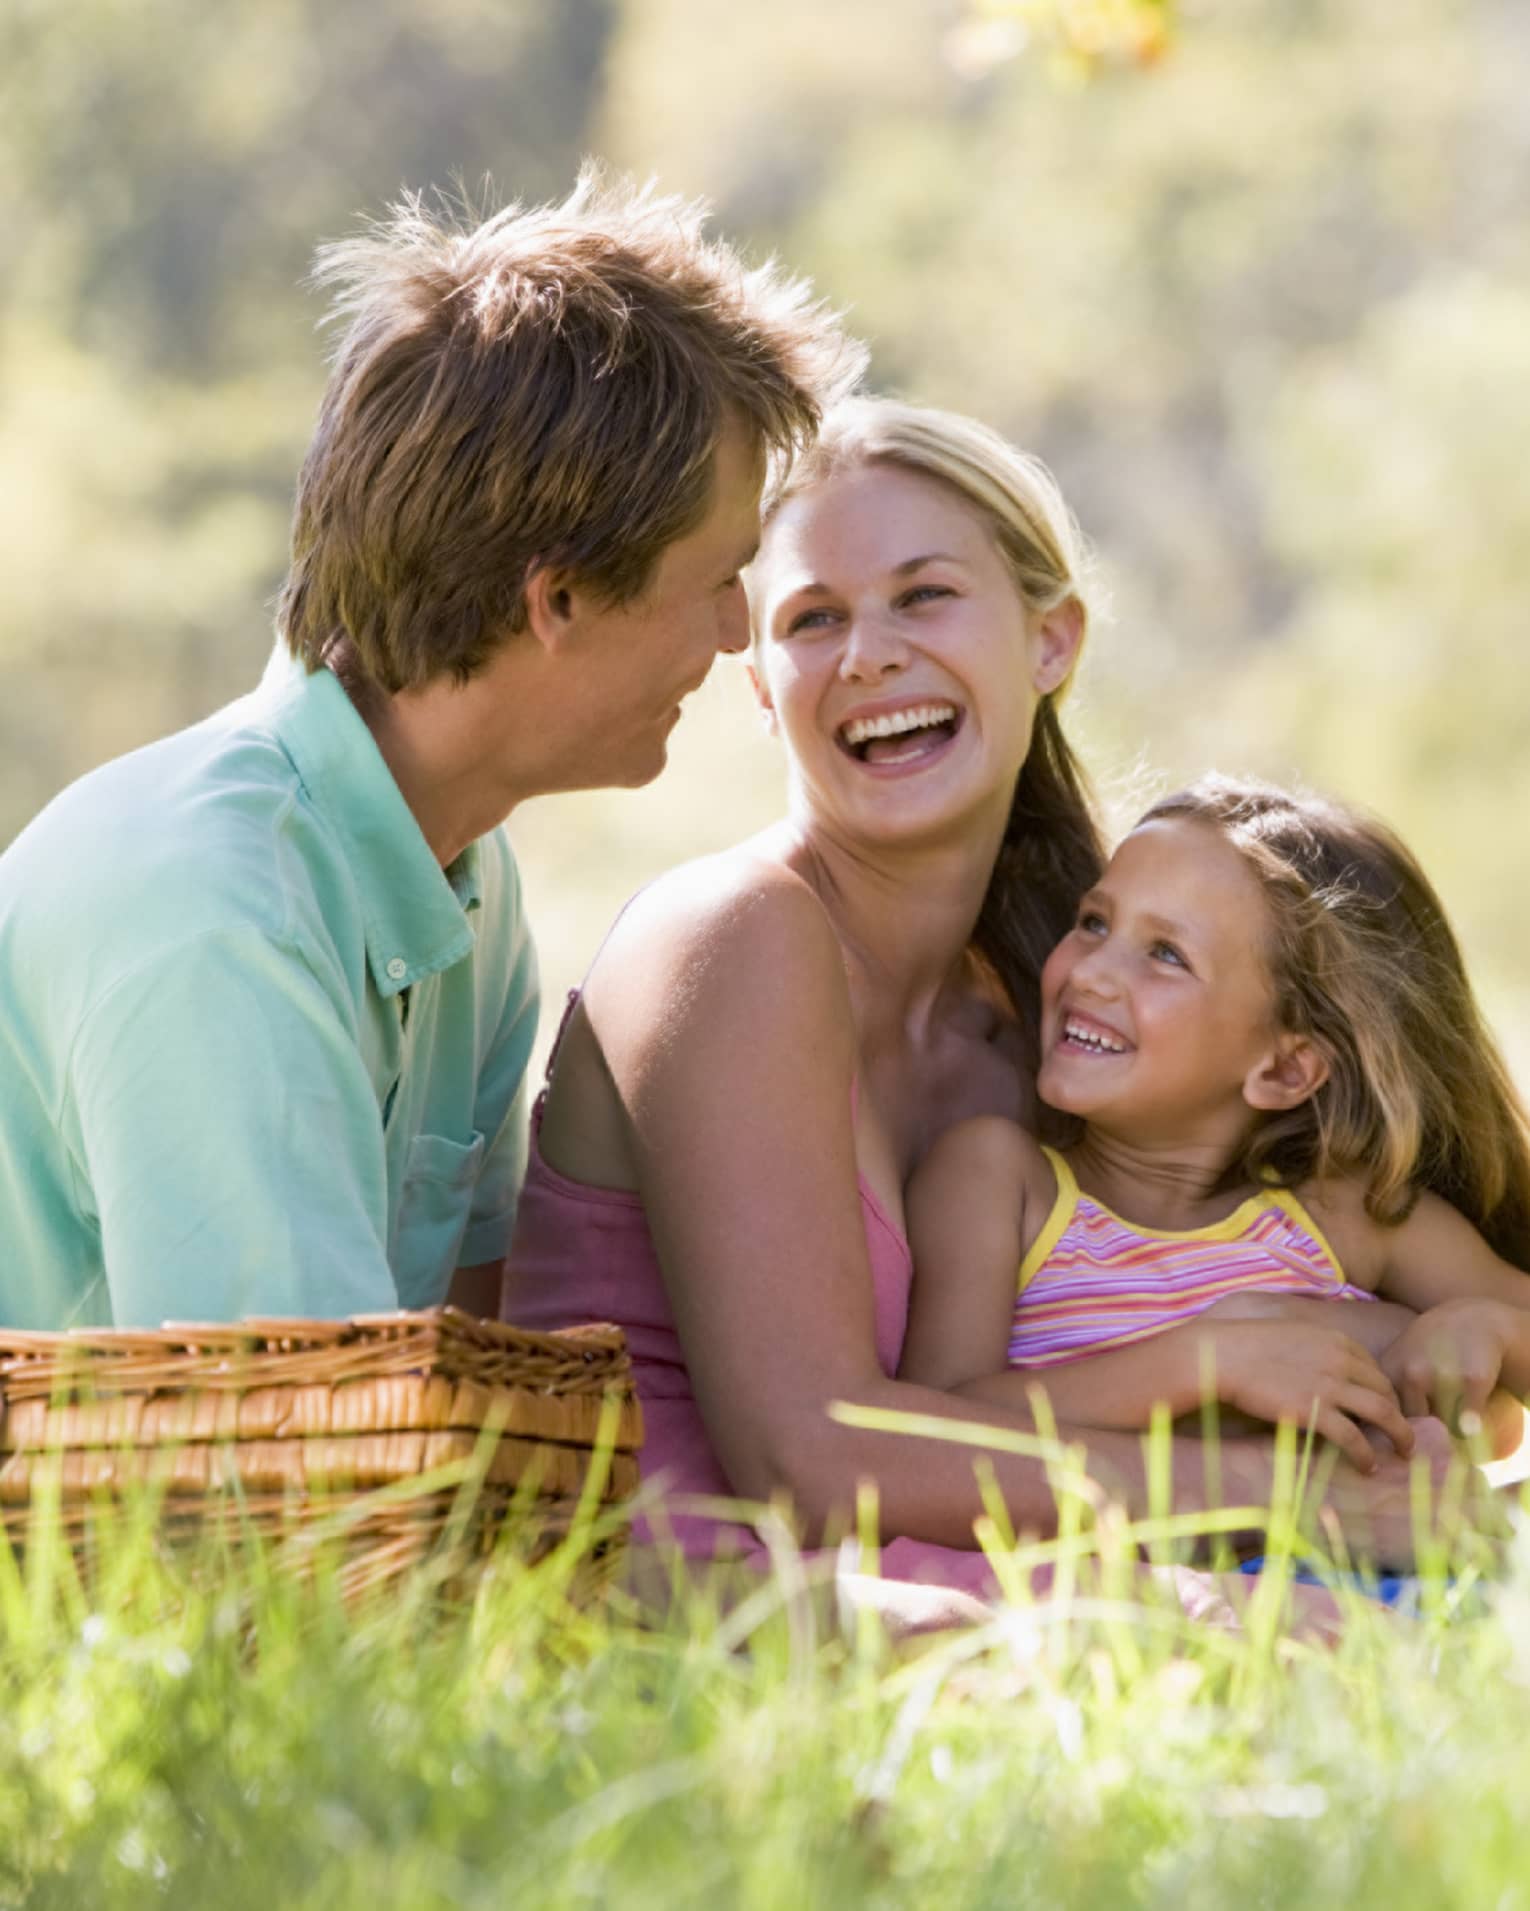 Smiling man, woman and young girl sit in tall grass by picnic basket on sunny day